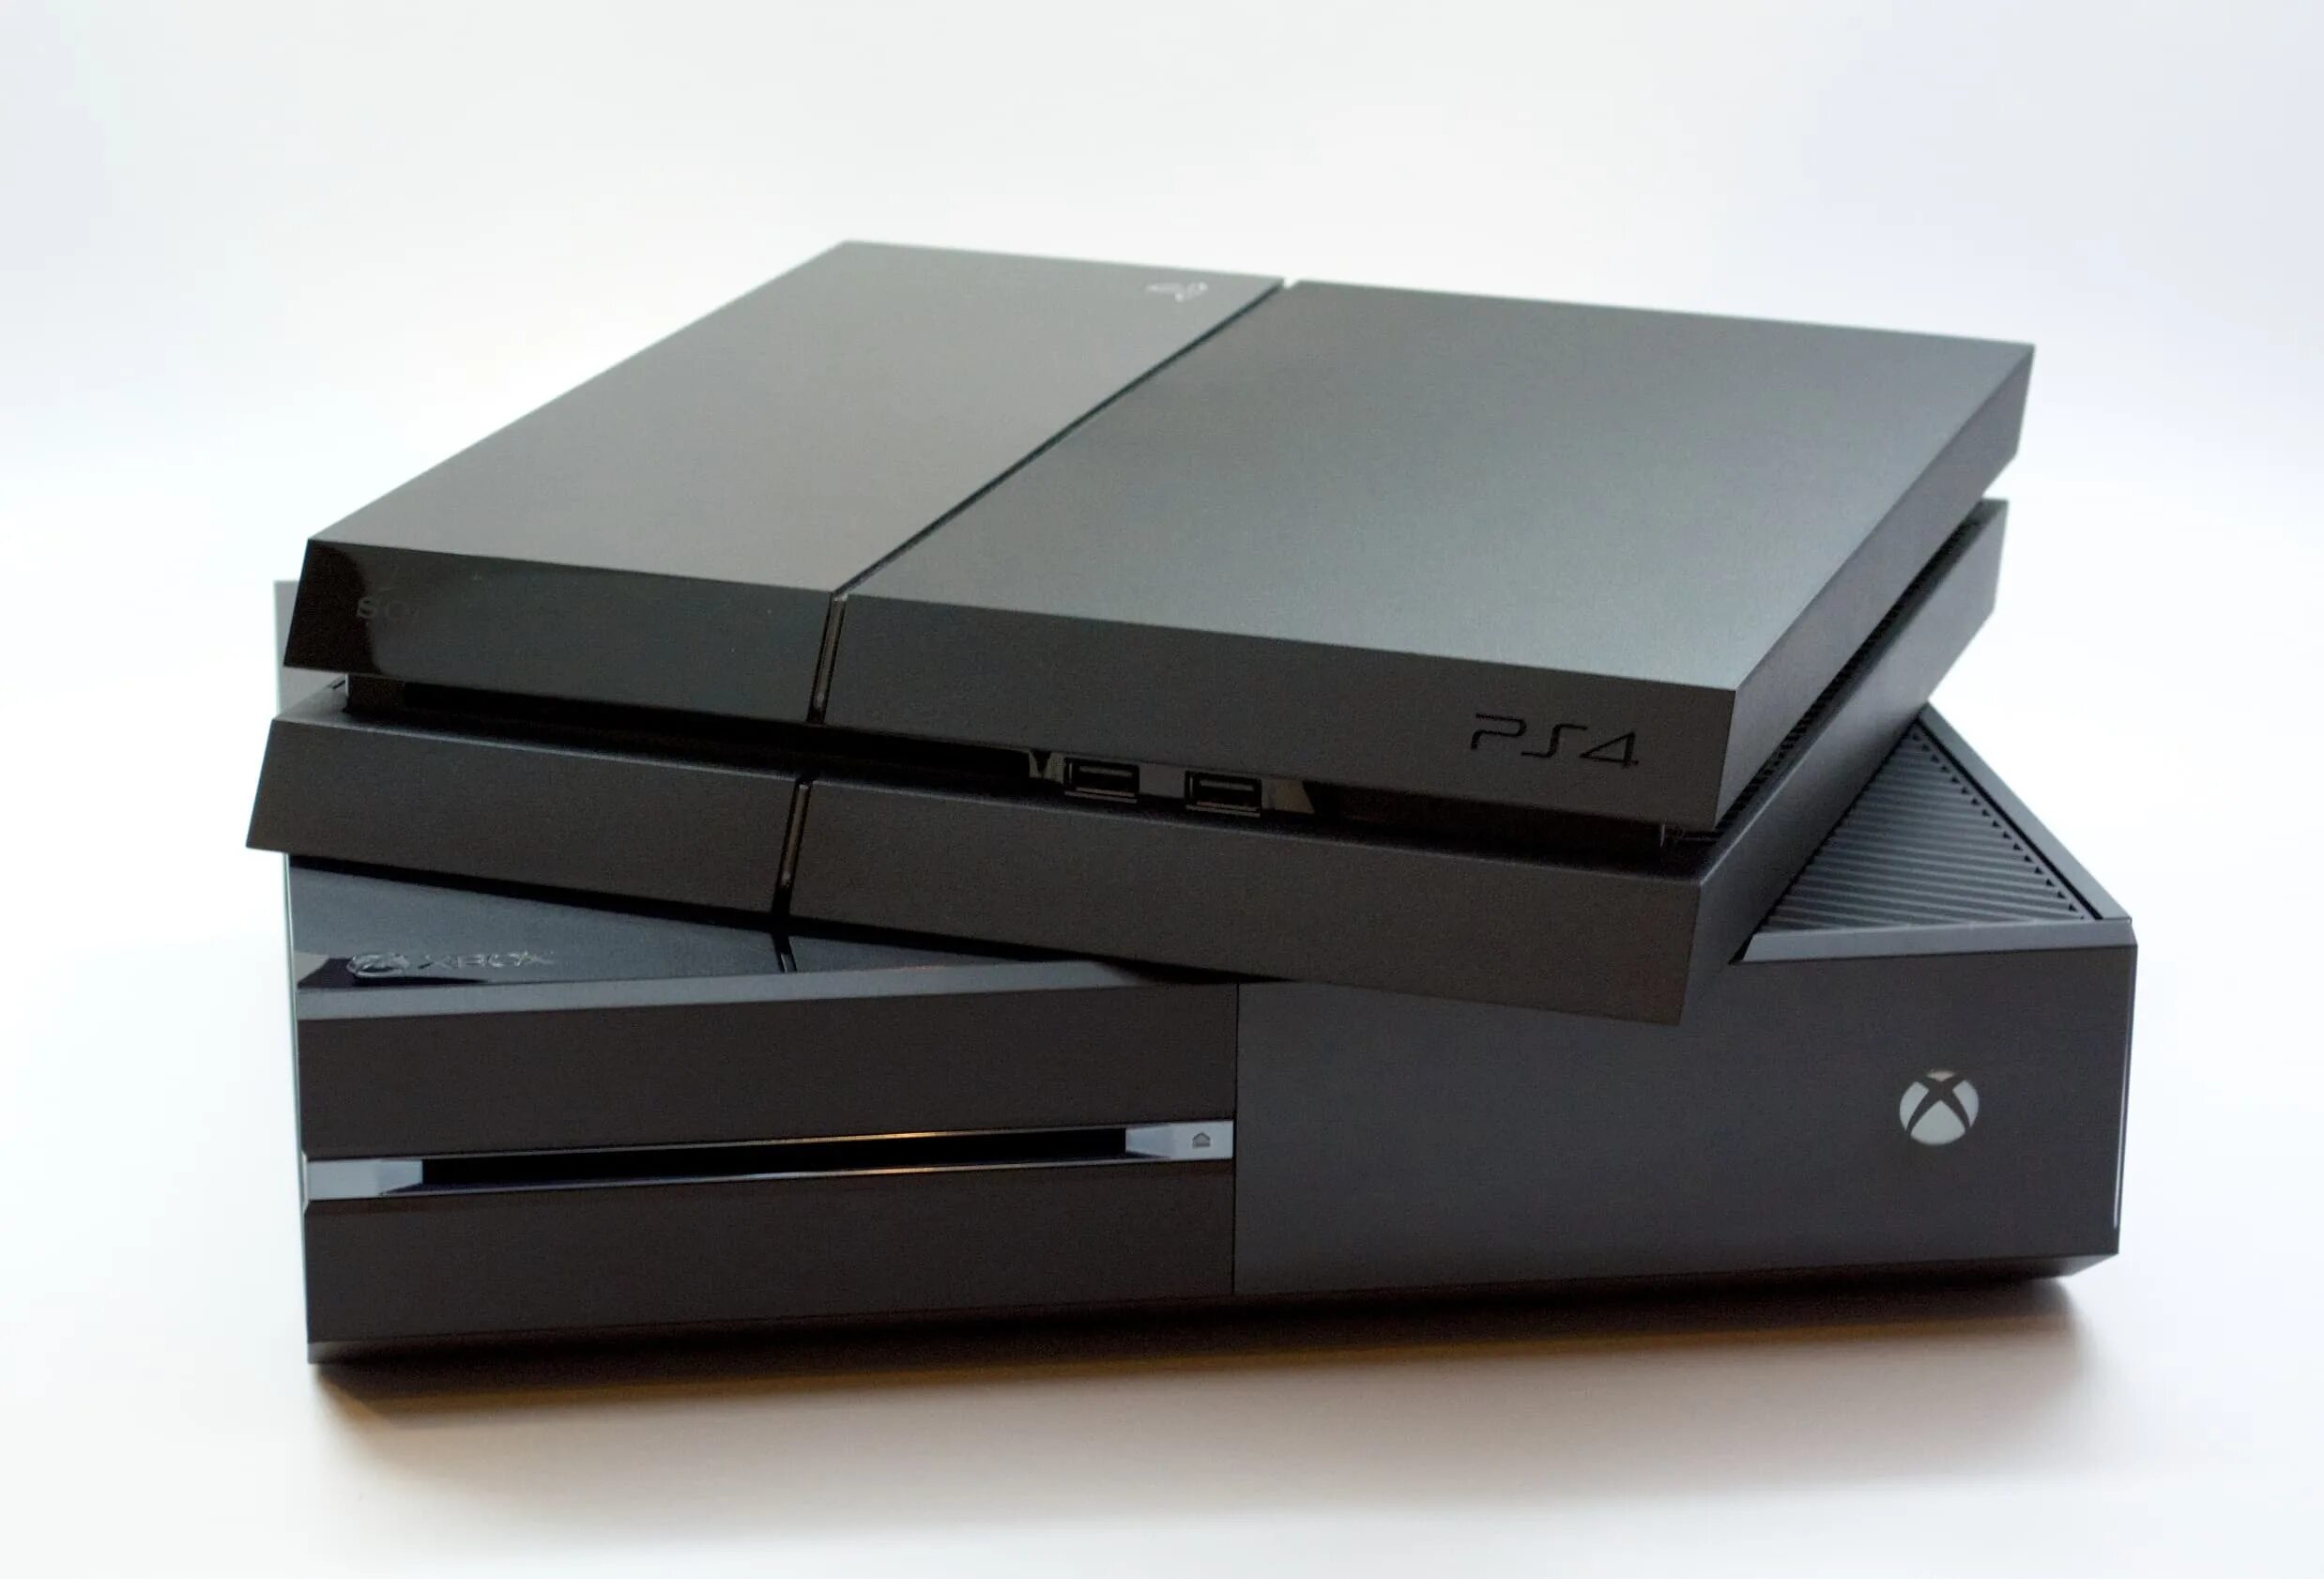 Ps4 Xbox one. PLAYSTATION ps4. Пс4 Xbox one s.. Хбокс оне и плейстейшен 4. Playstation 4 pc